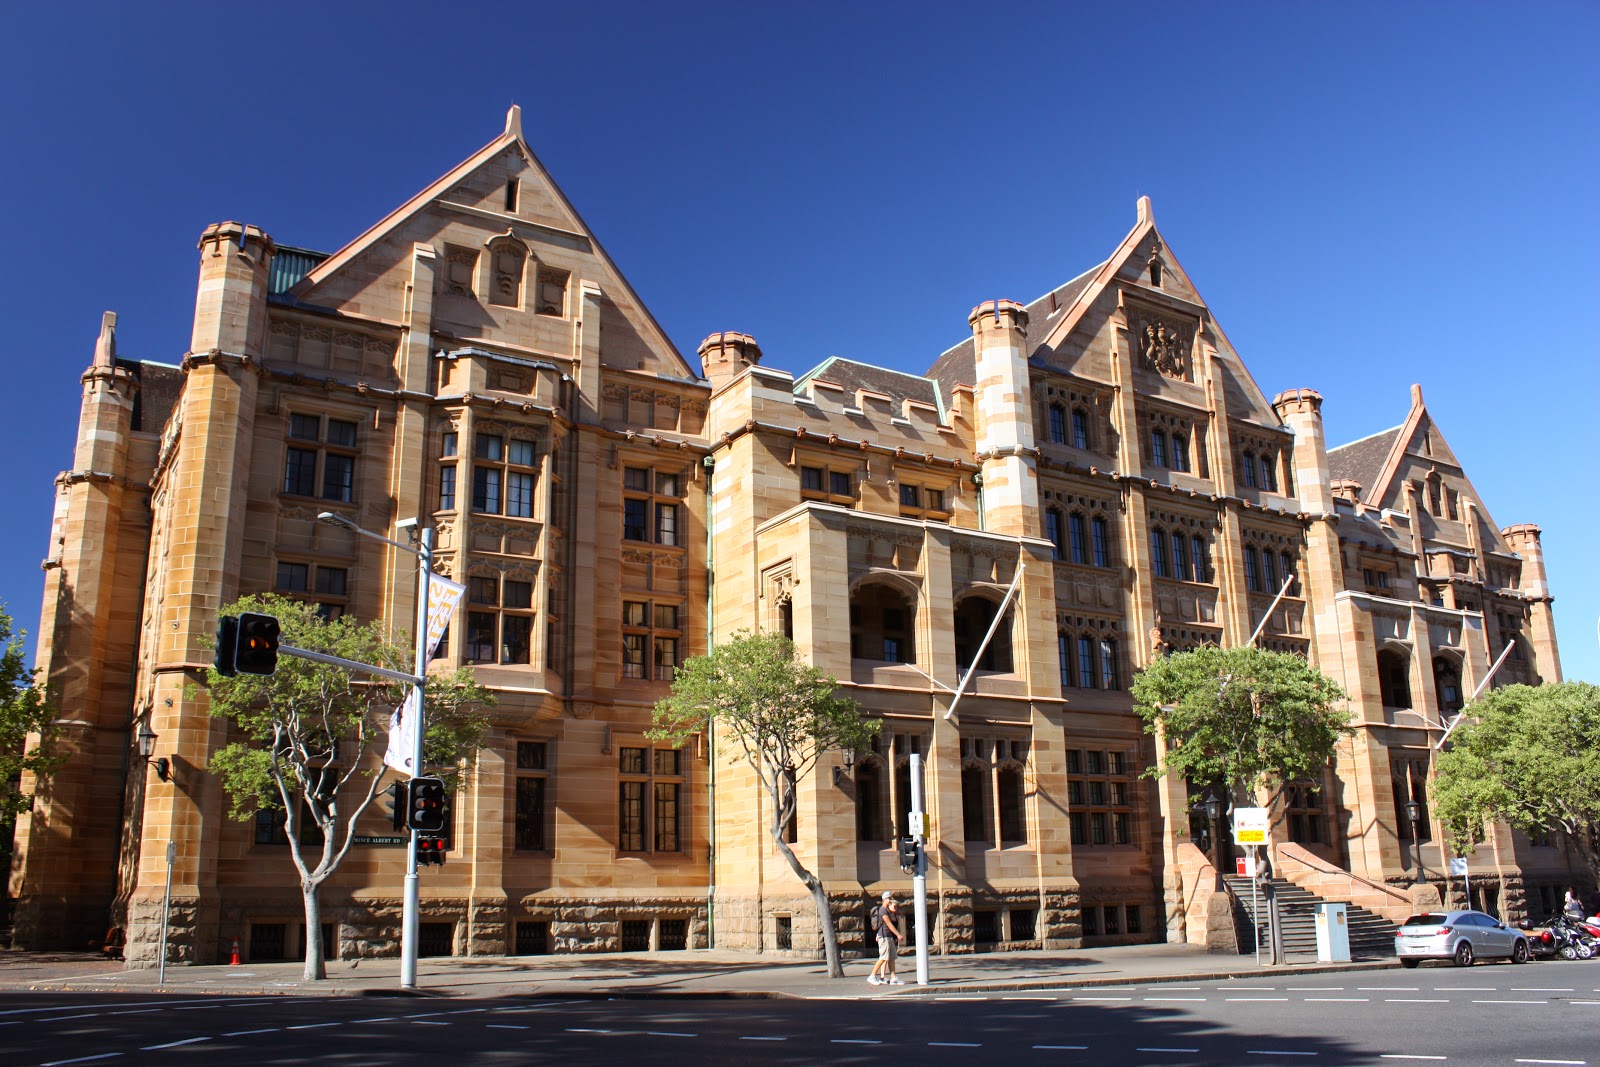 Sydney - City and Suburbs: Land Titles Office